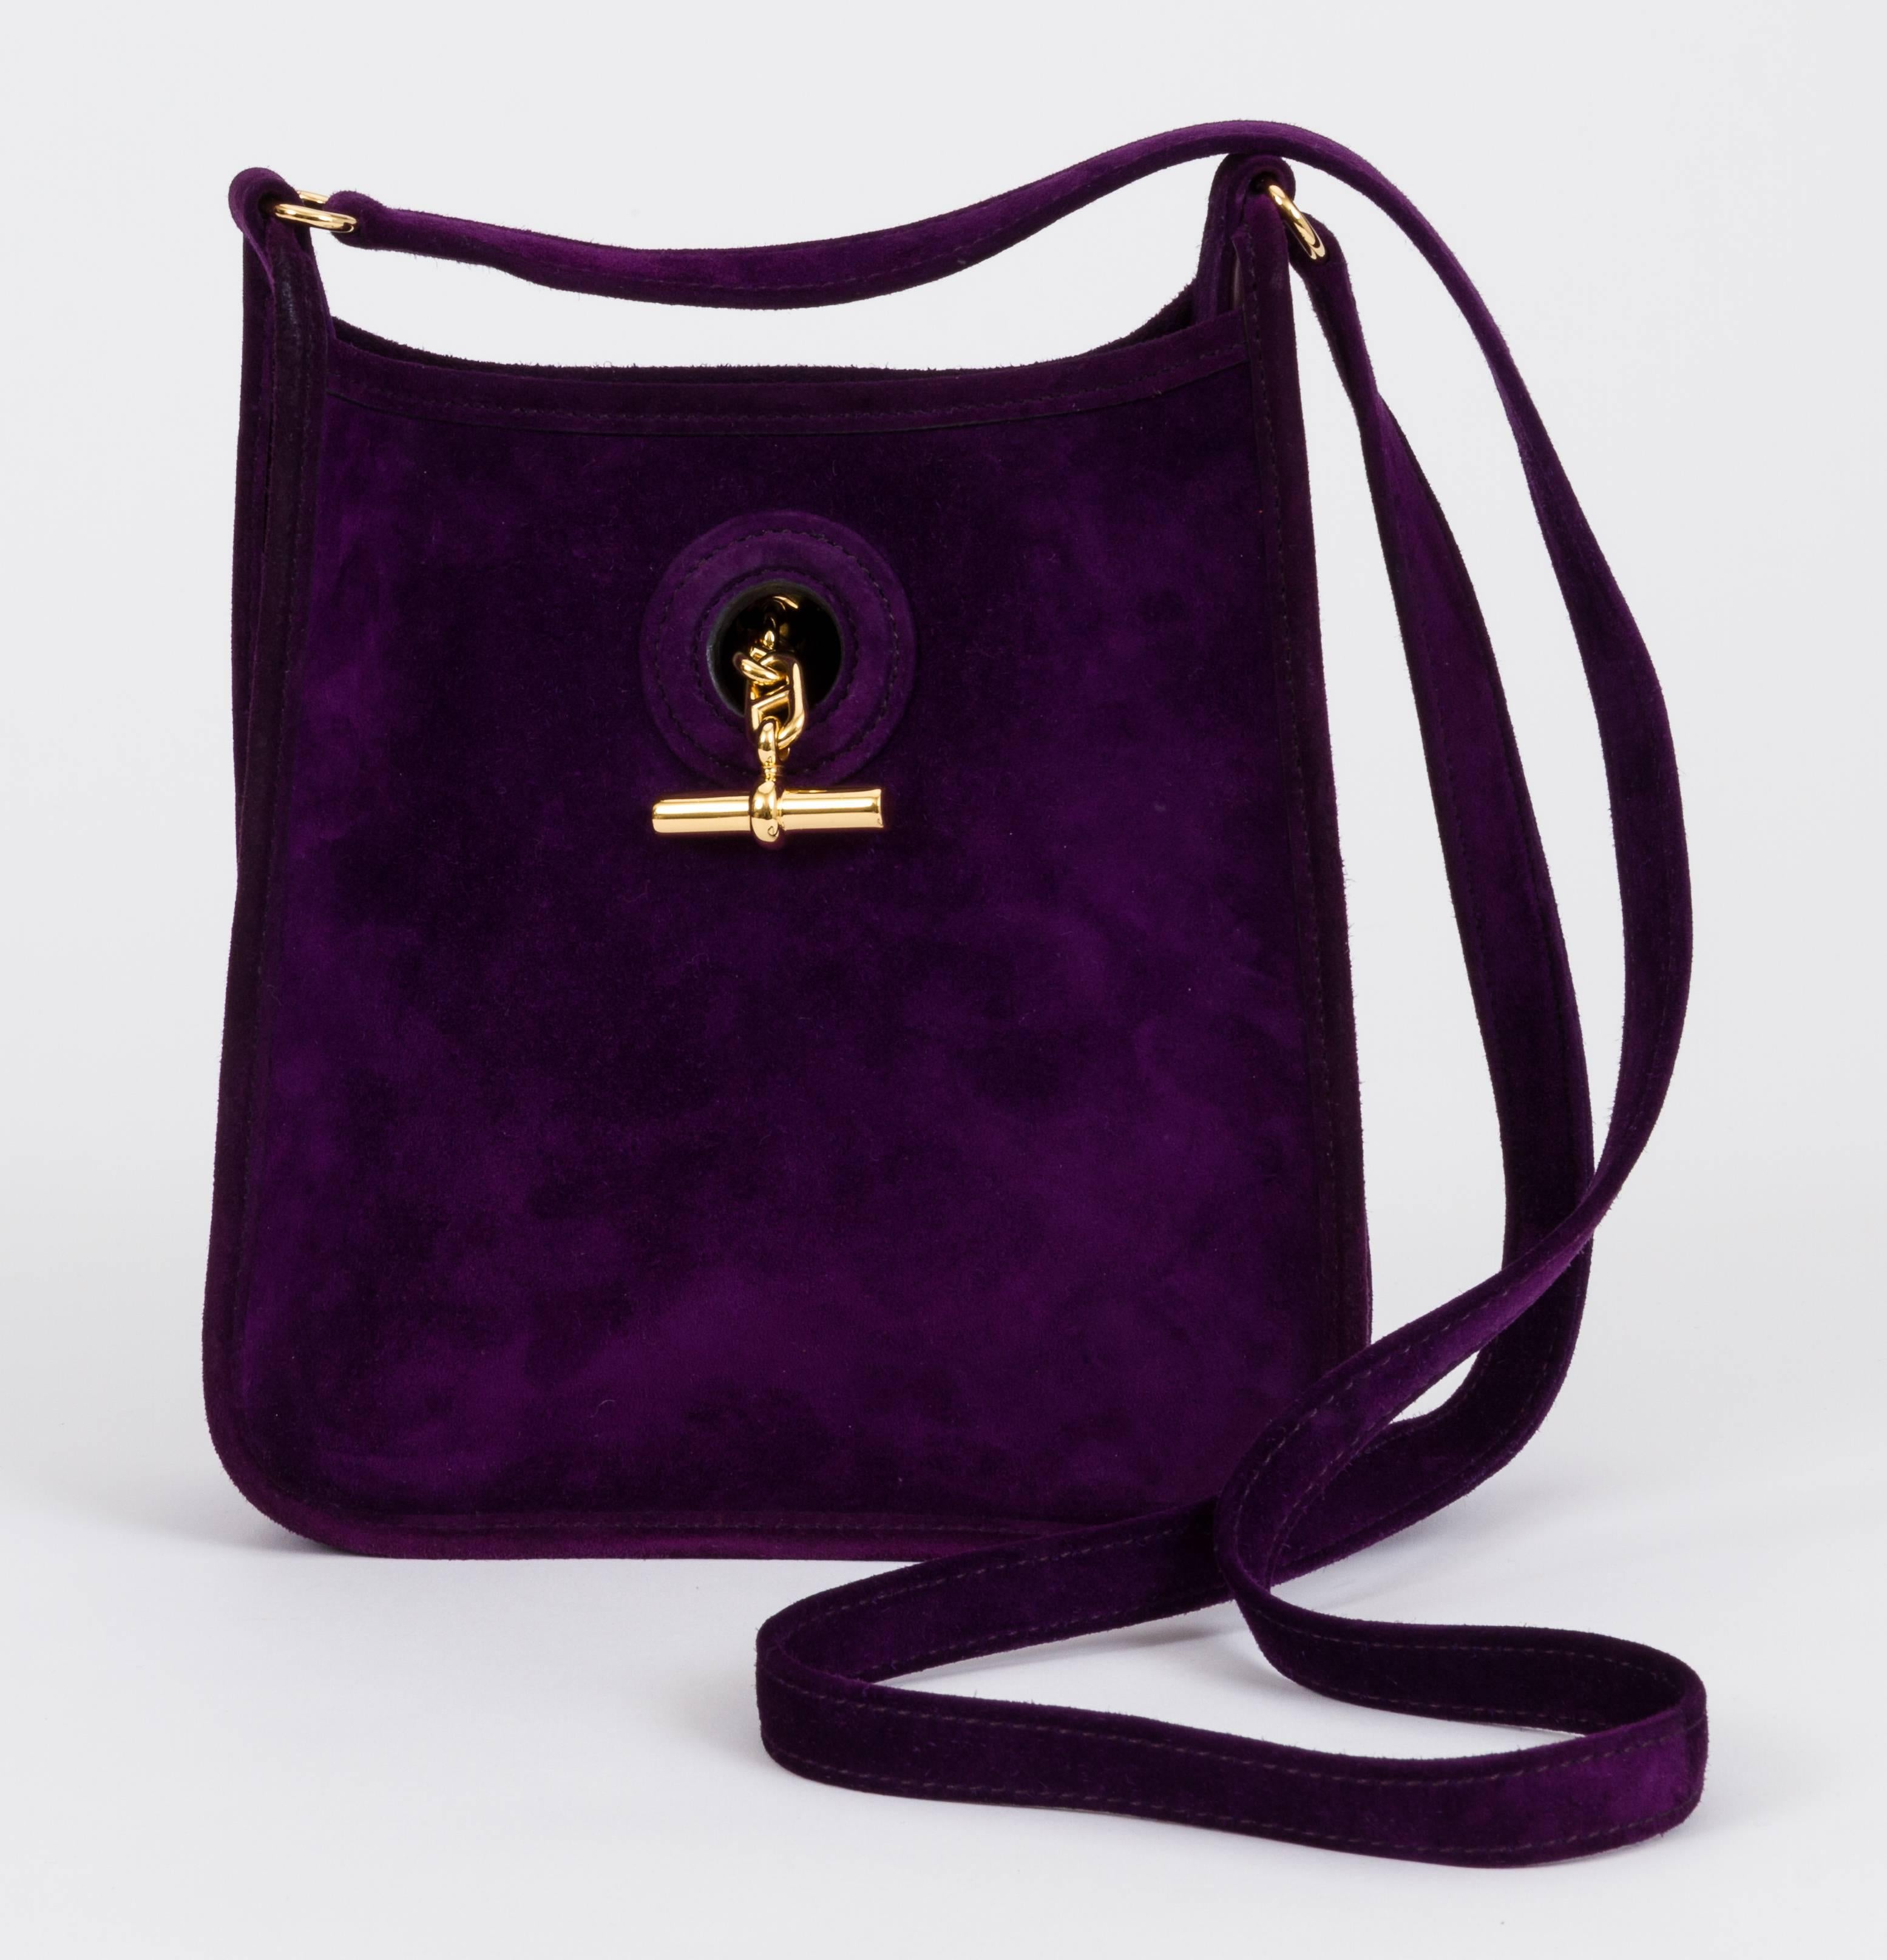 Hermes rare and collectible mini vespa TPM cross body bag. Doblis (suede) purple leather and gold tone hardware. Shoulder drop 23